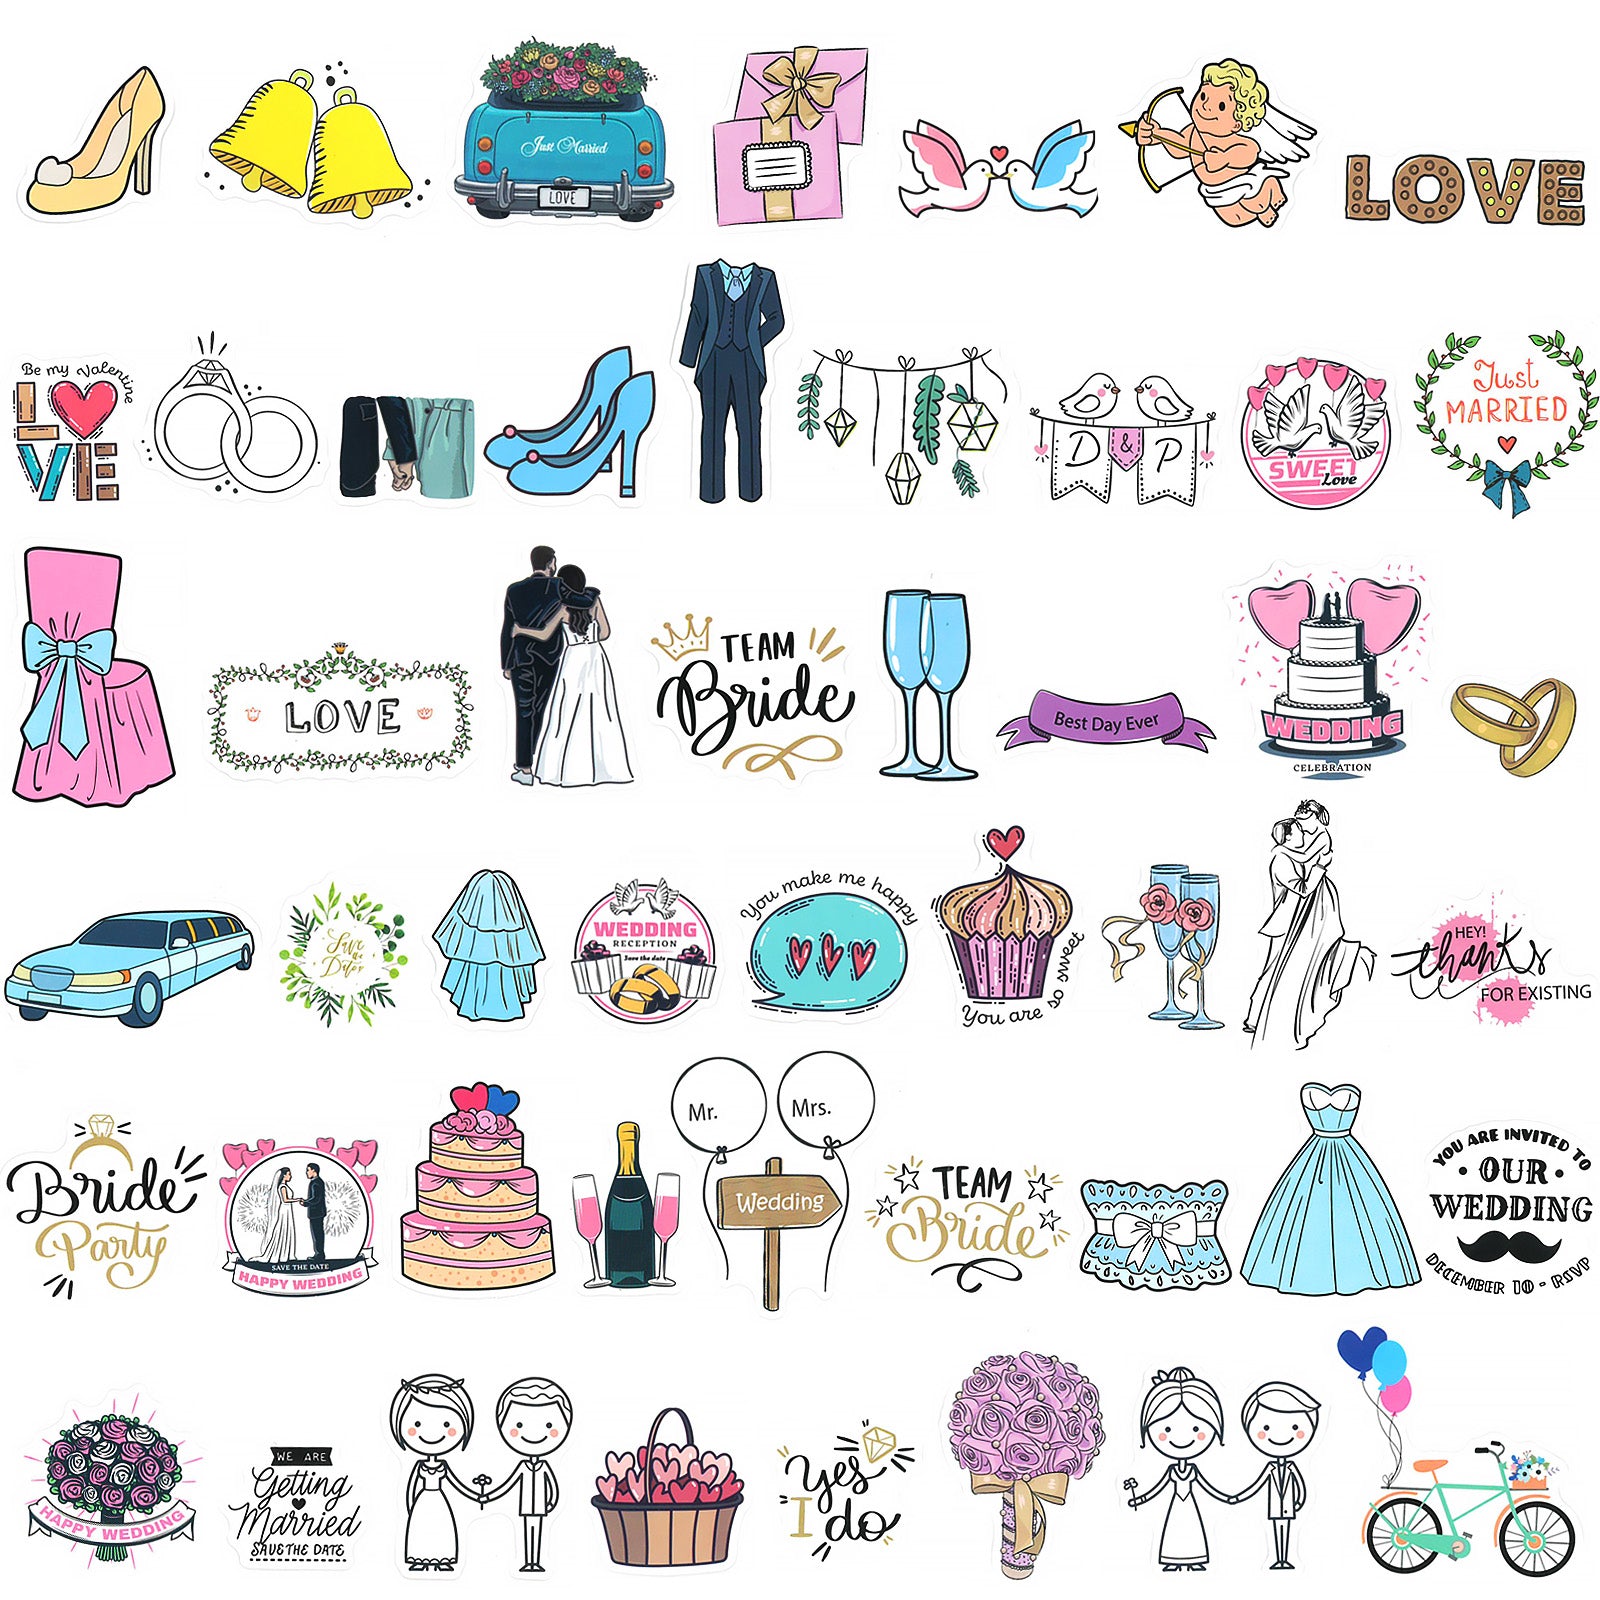 Wrapables Waterproof Vinyl Stickers for Water Bottles, Laptop, Phones, Skateboards, Decals for Teens